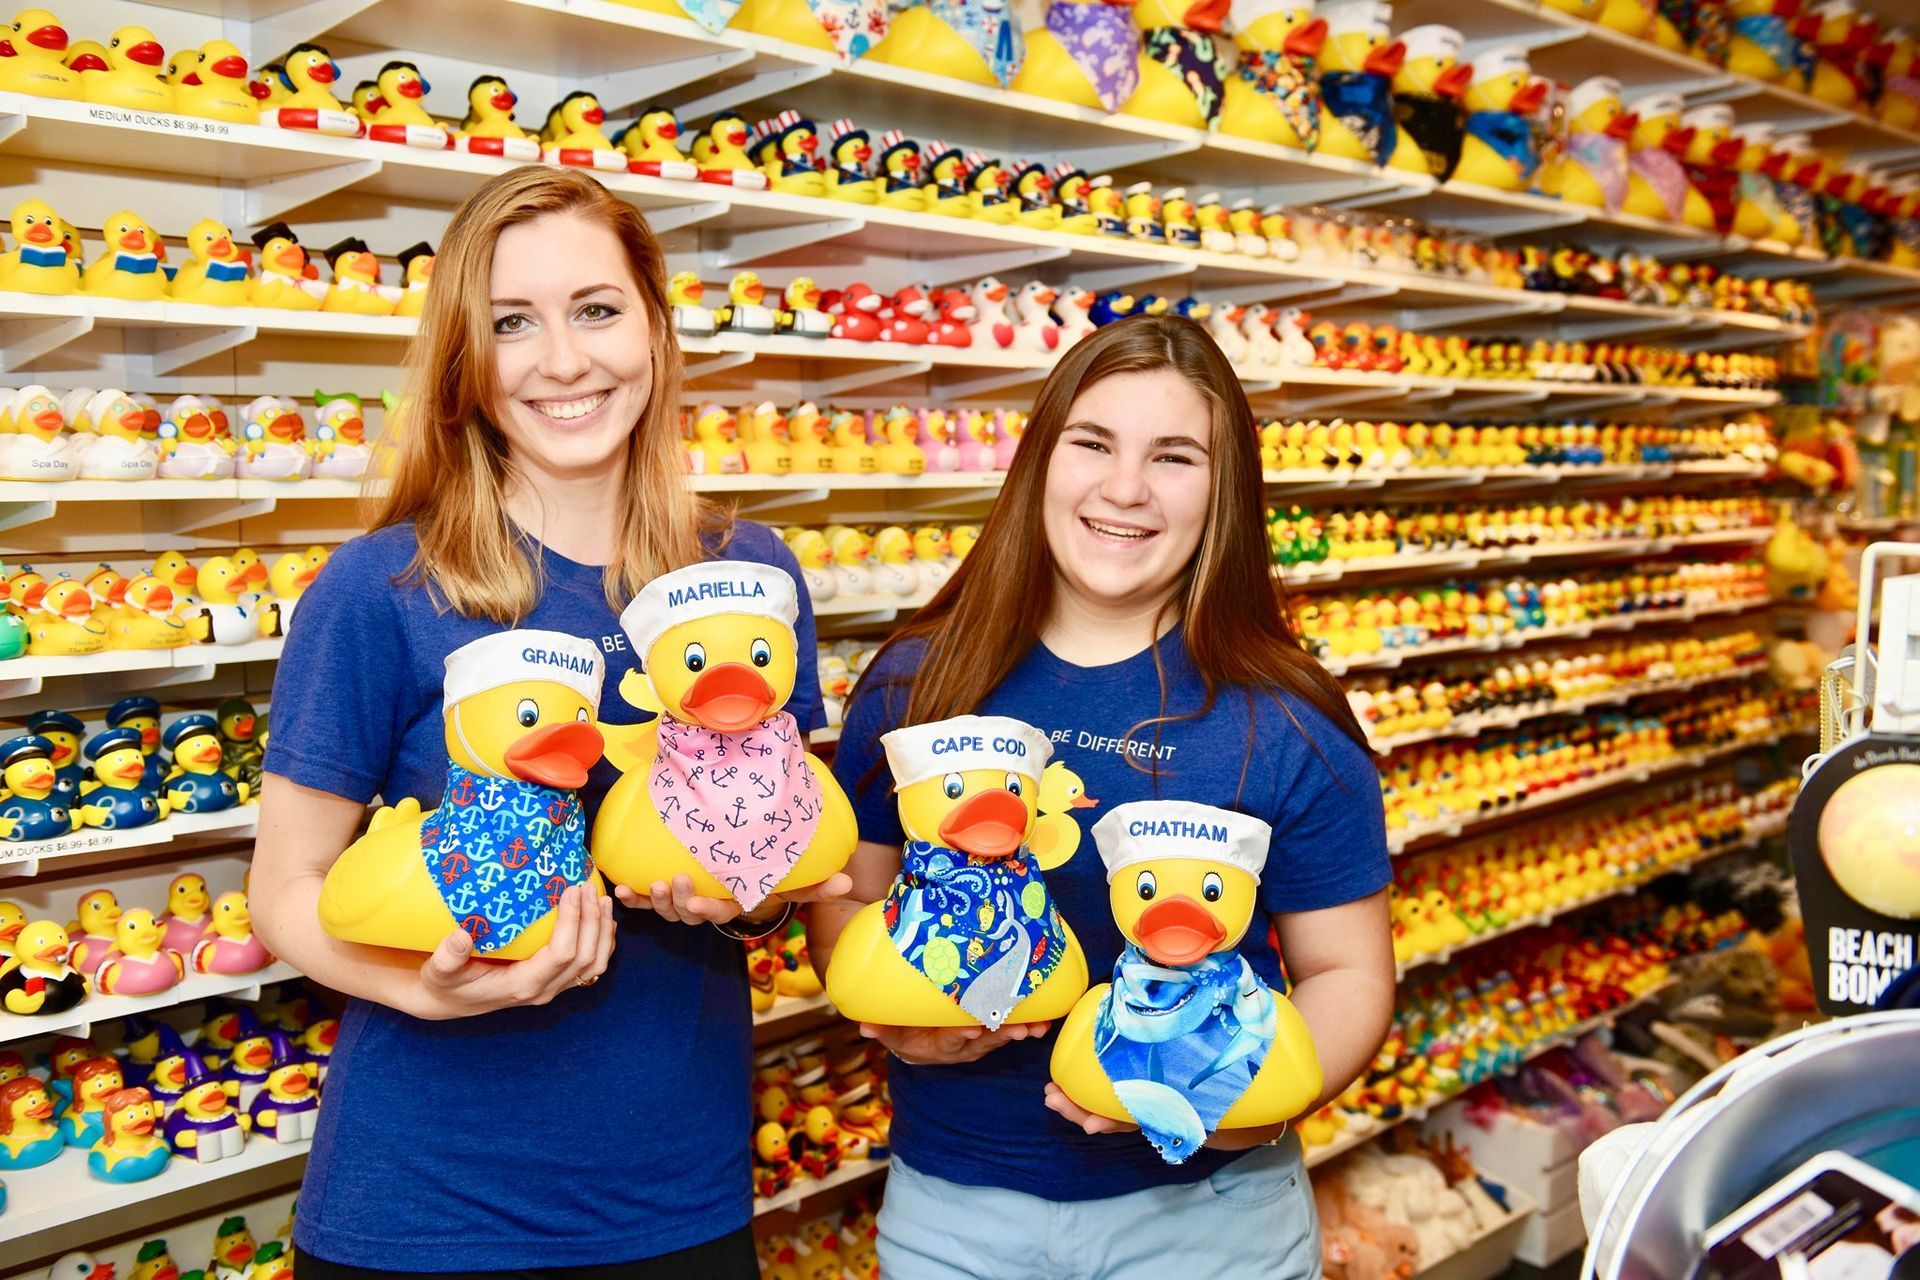 
World's Largest Rubber Duck Store, world record in Chatham, Massachusetts